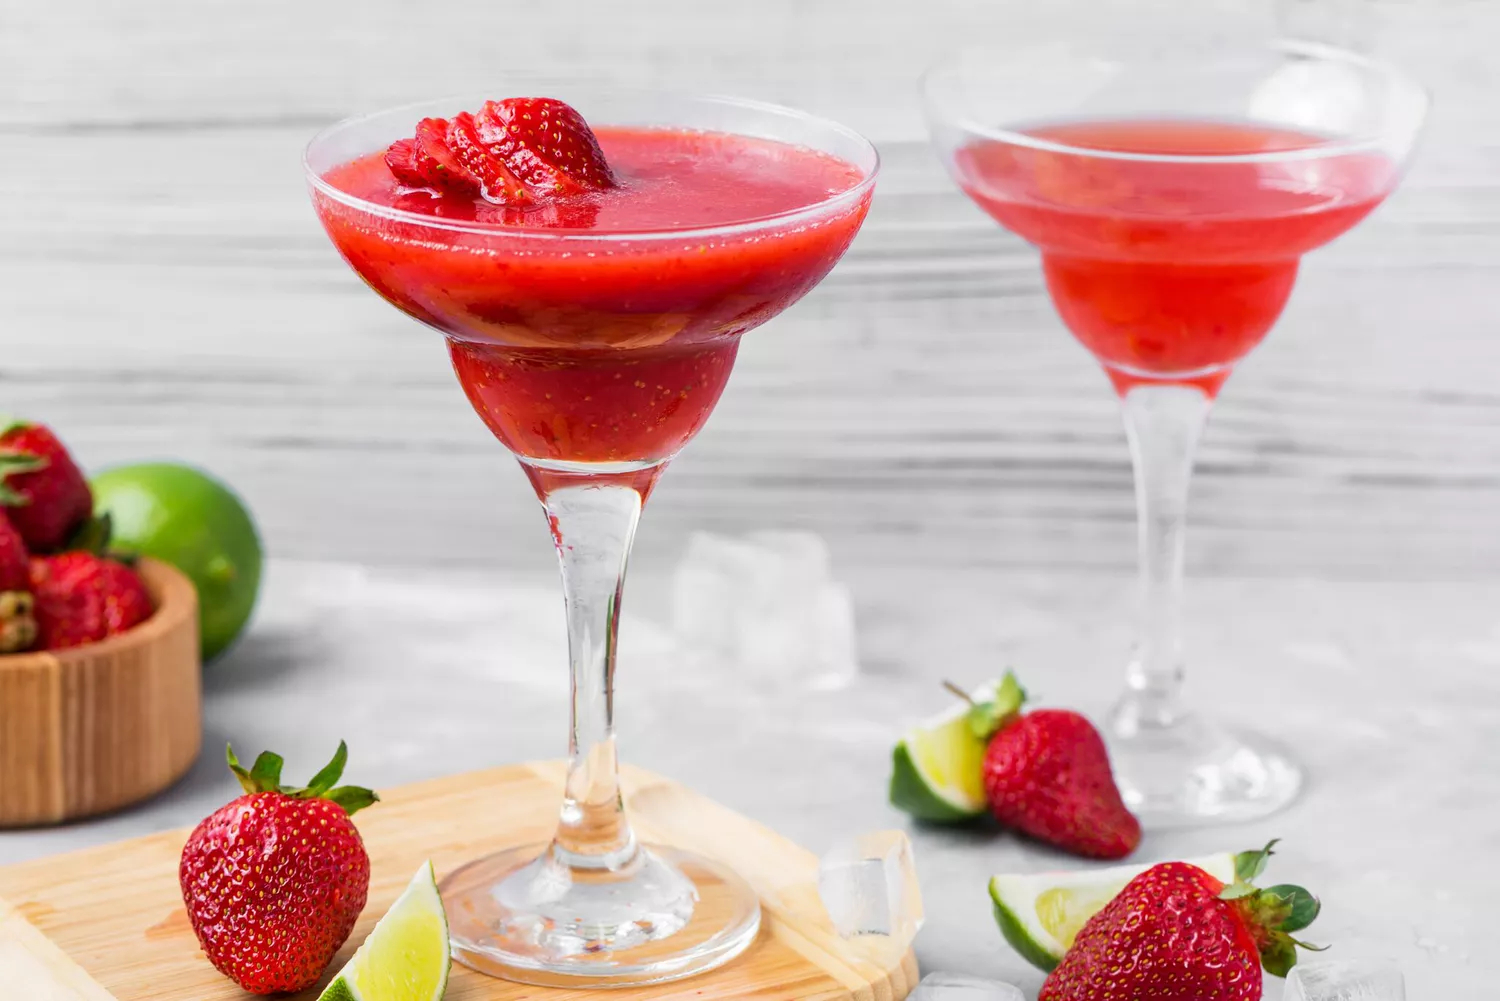 How To Make A Strawberry Daiquiri With A Blender